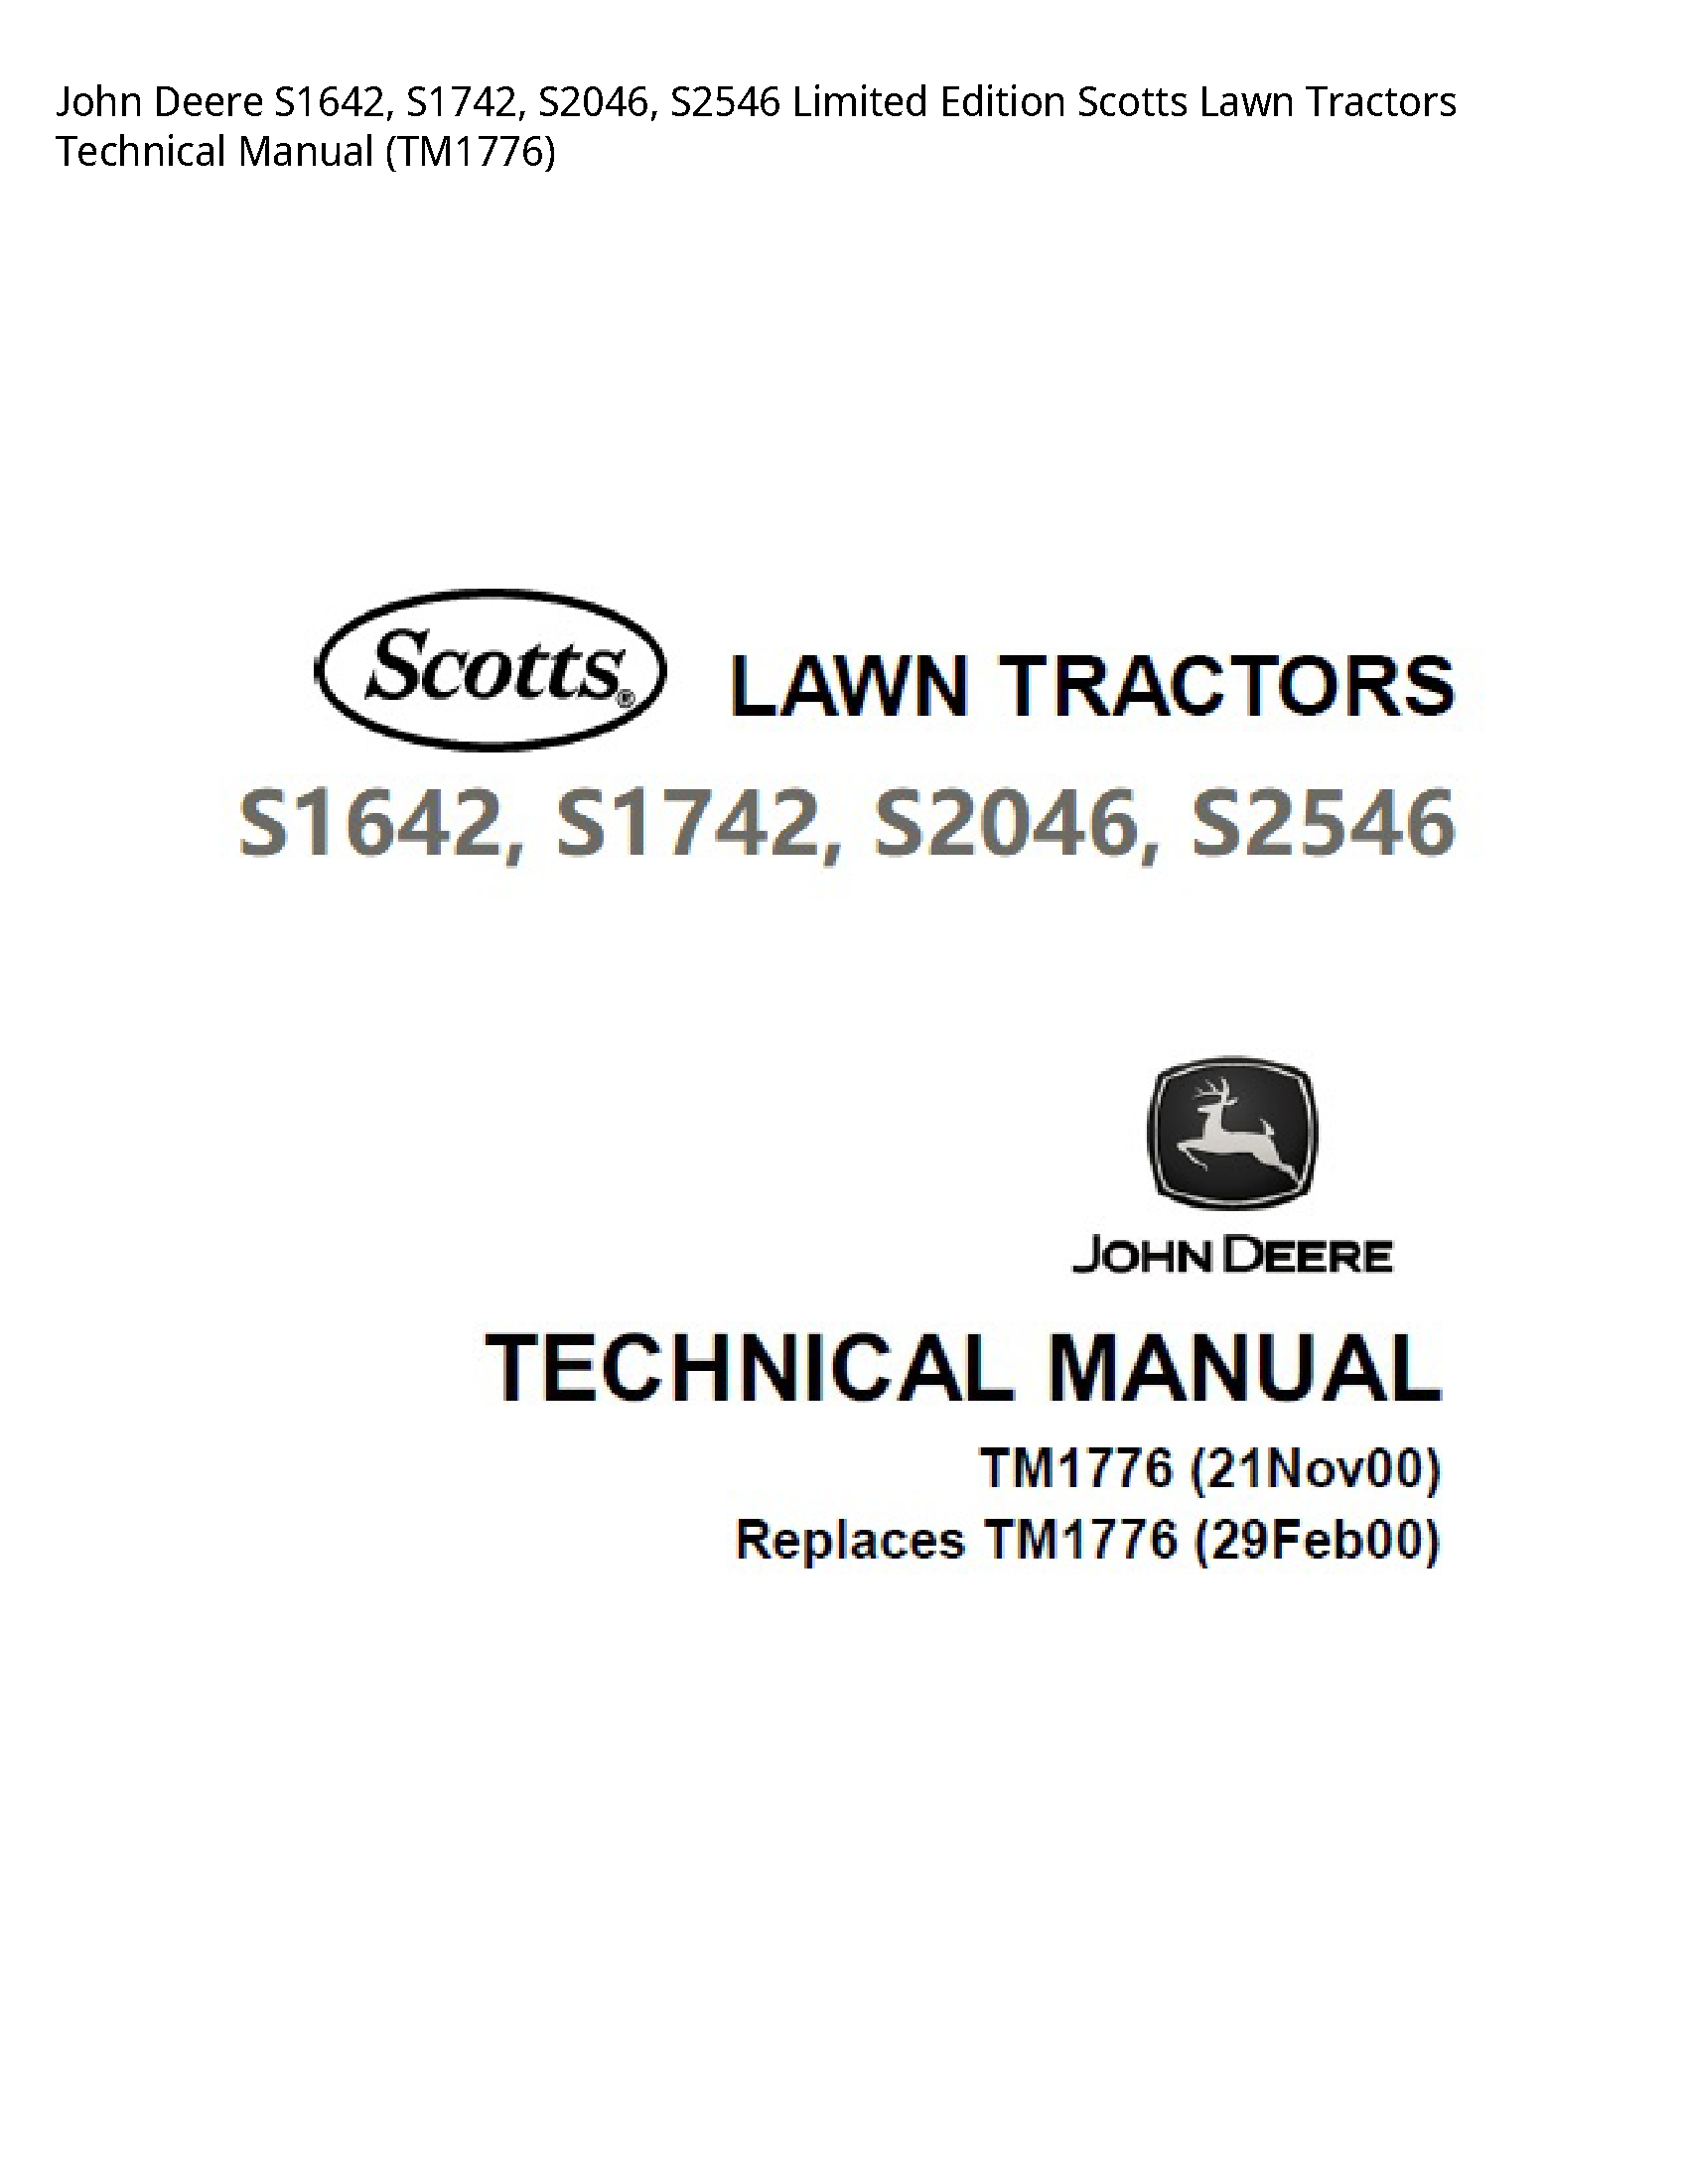 John Deere S1642 Limited Edition Scotts Lawn Tractors Technical manual